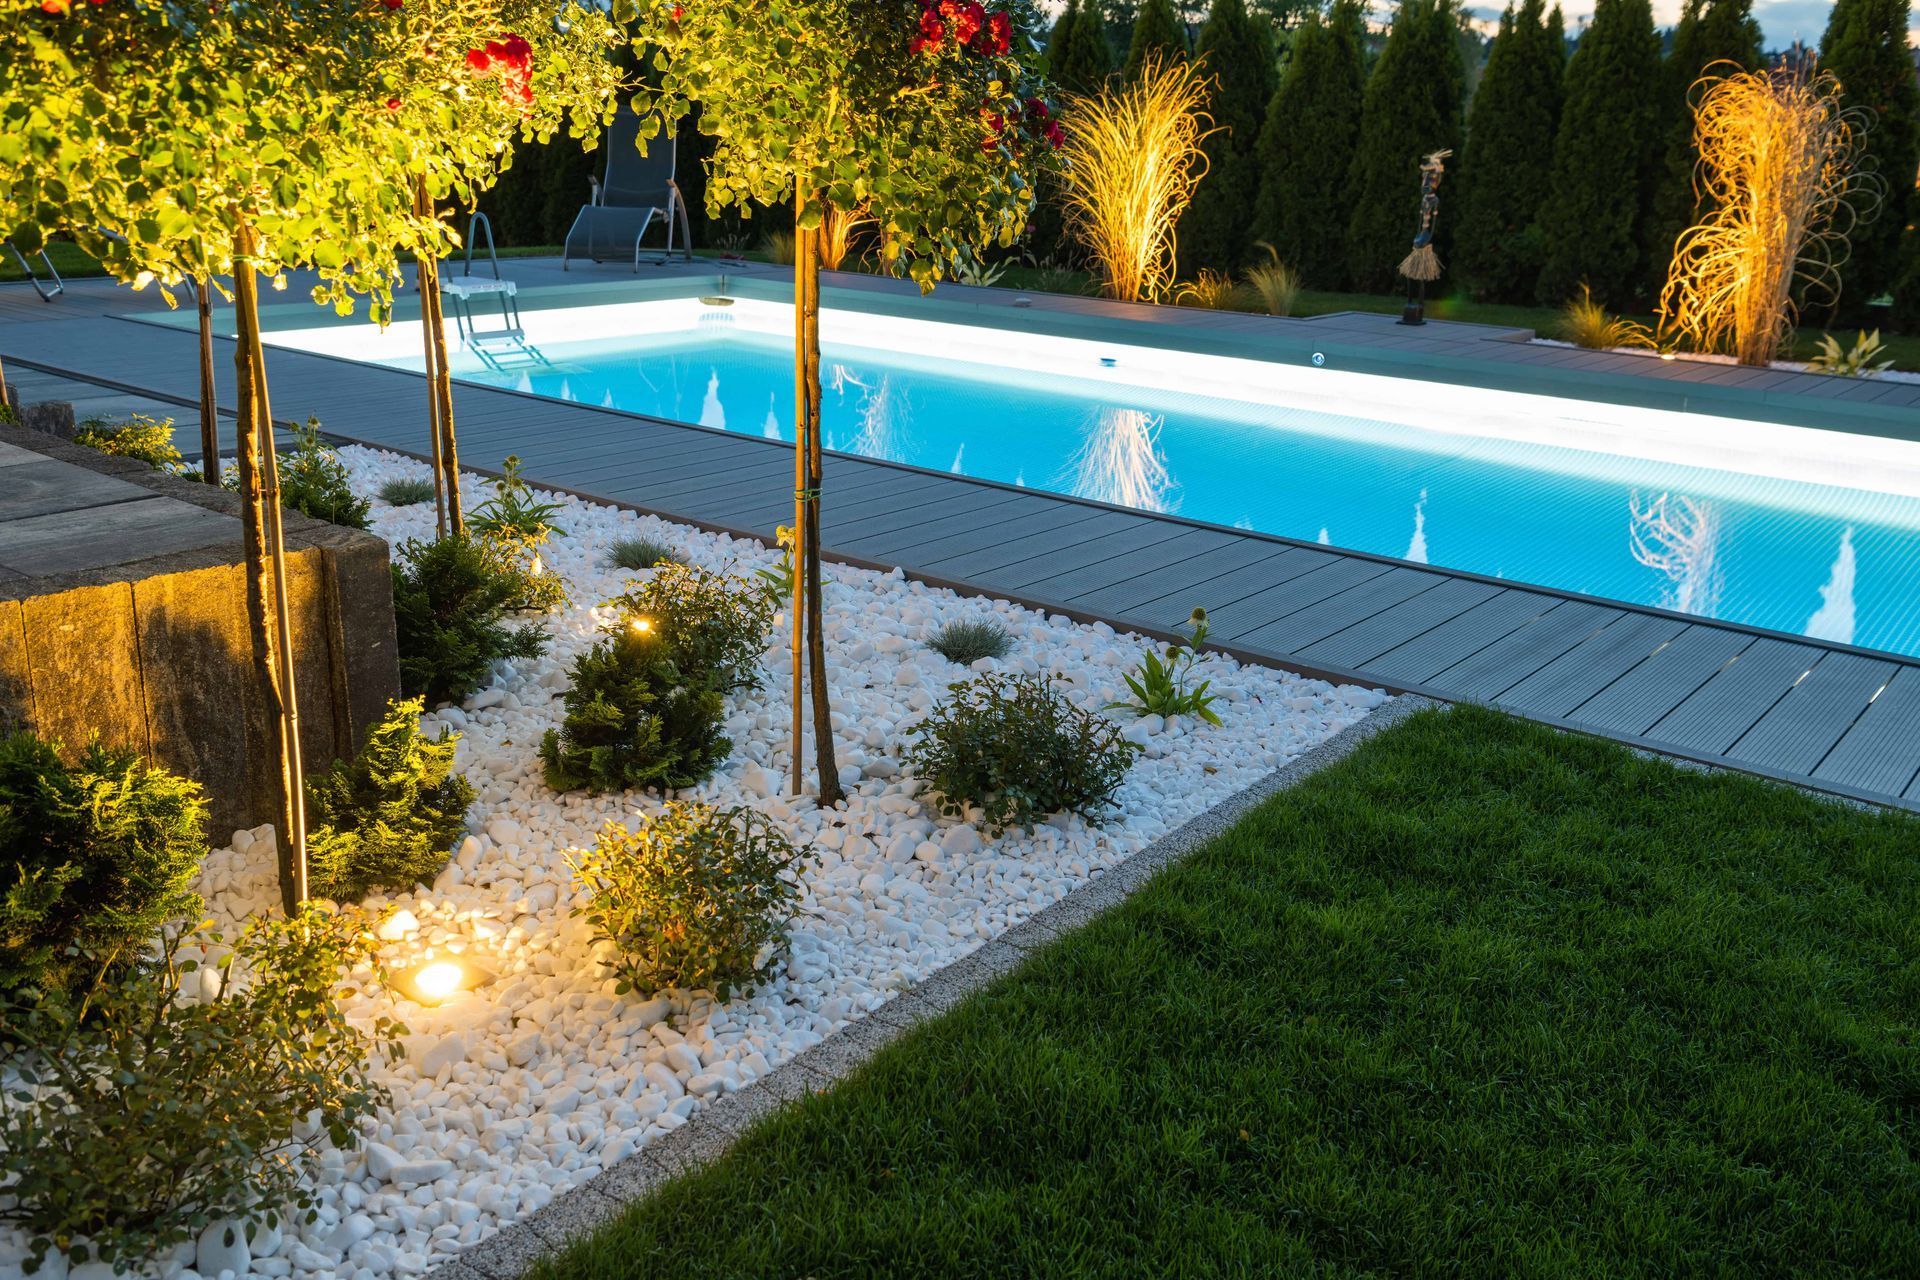 An outdoor, in-ground pool with lighting